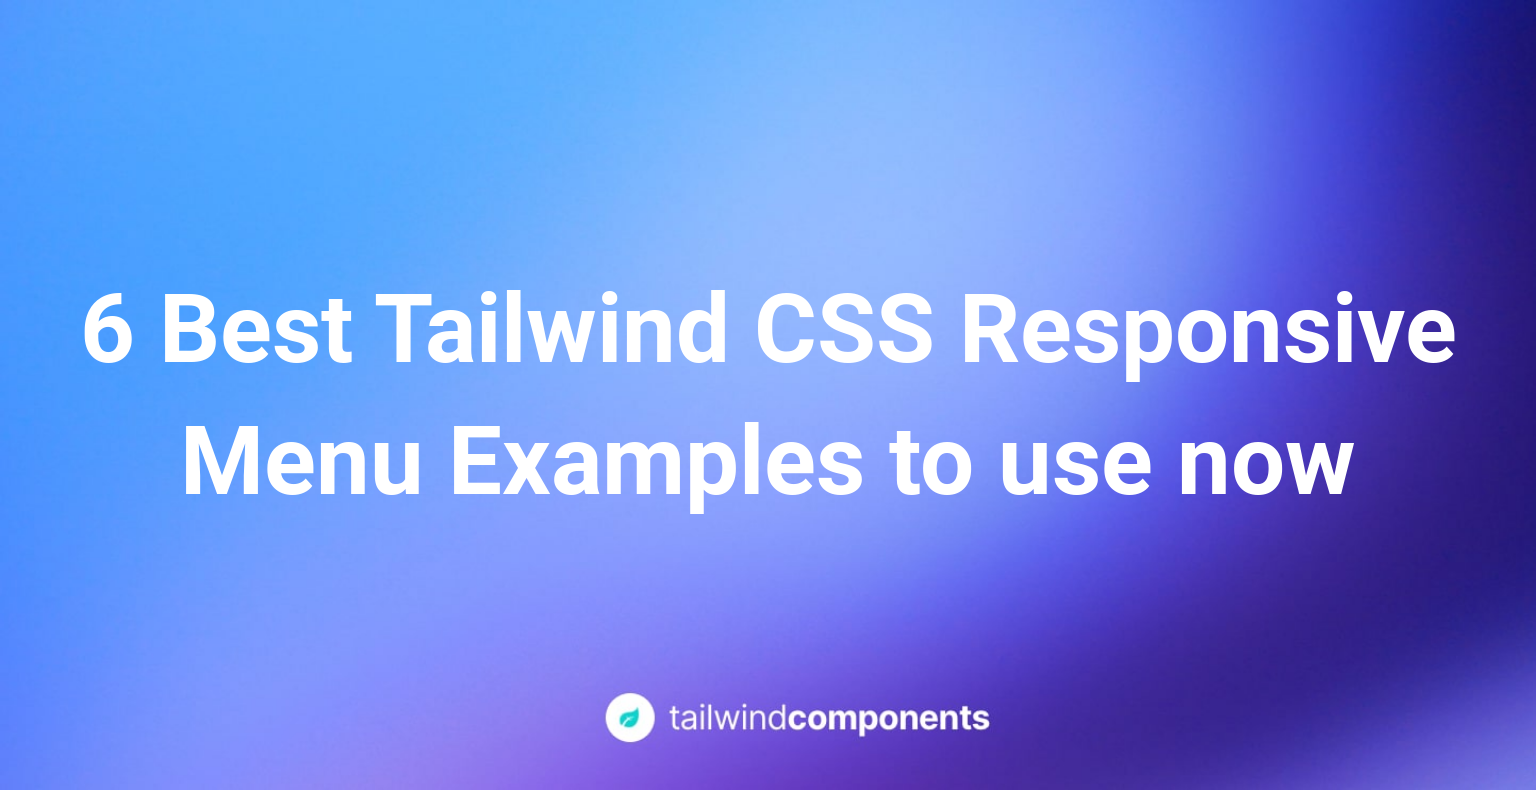 6 Best Tailwind CSS Responsive Menu Examples to use now Image